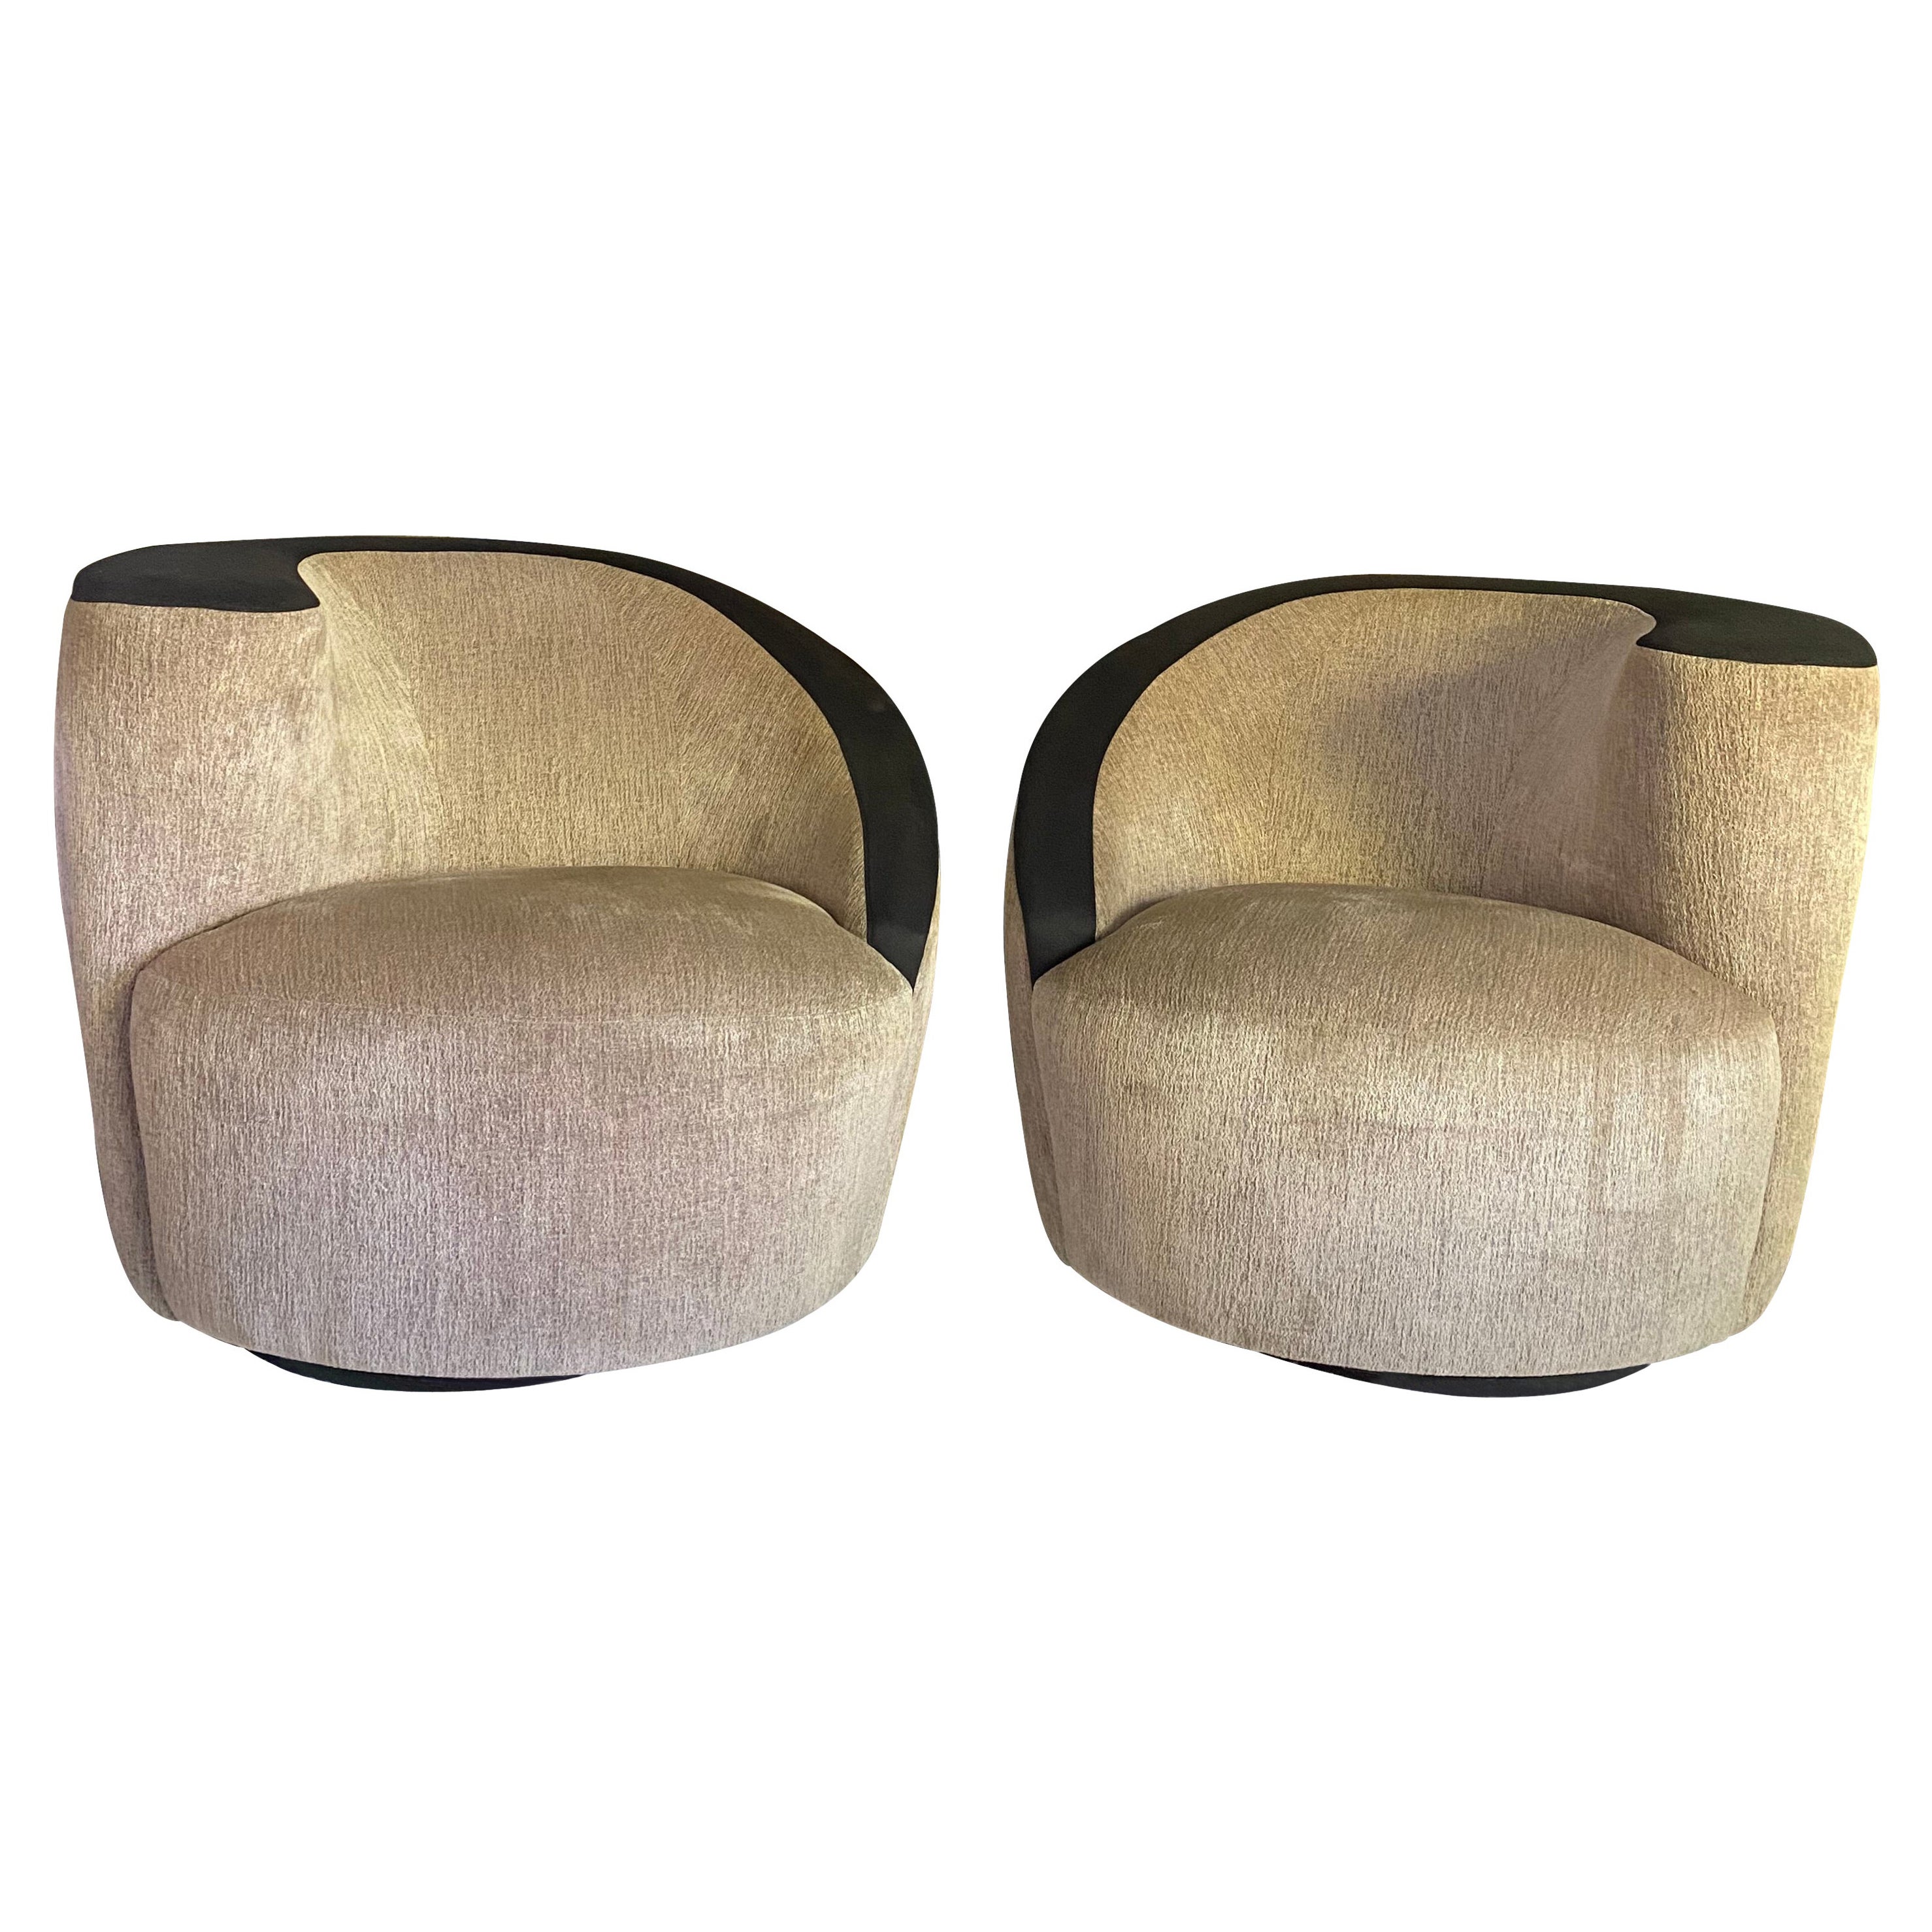 Weiman "Nautilus" Swivel Chairs, a Pair For Sale